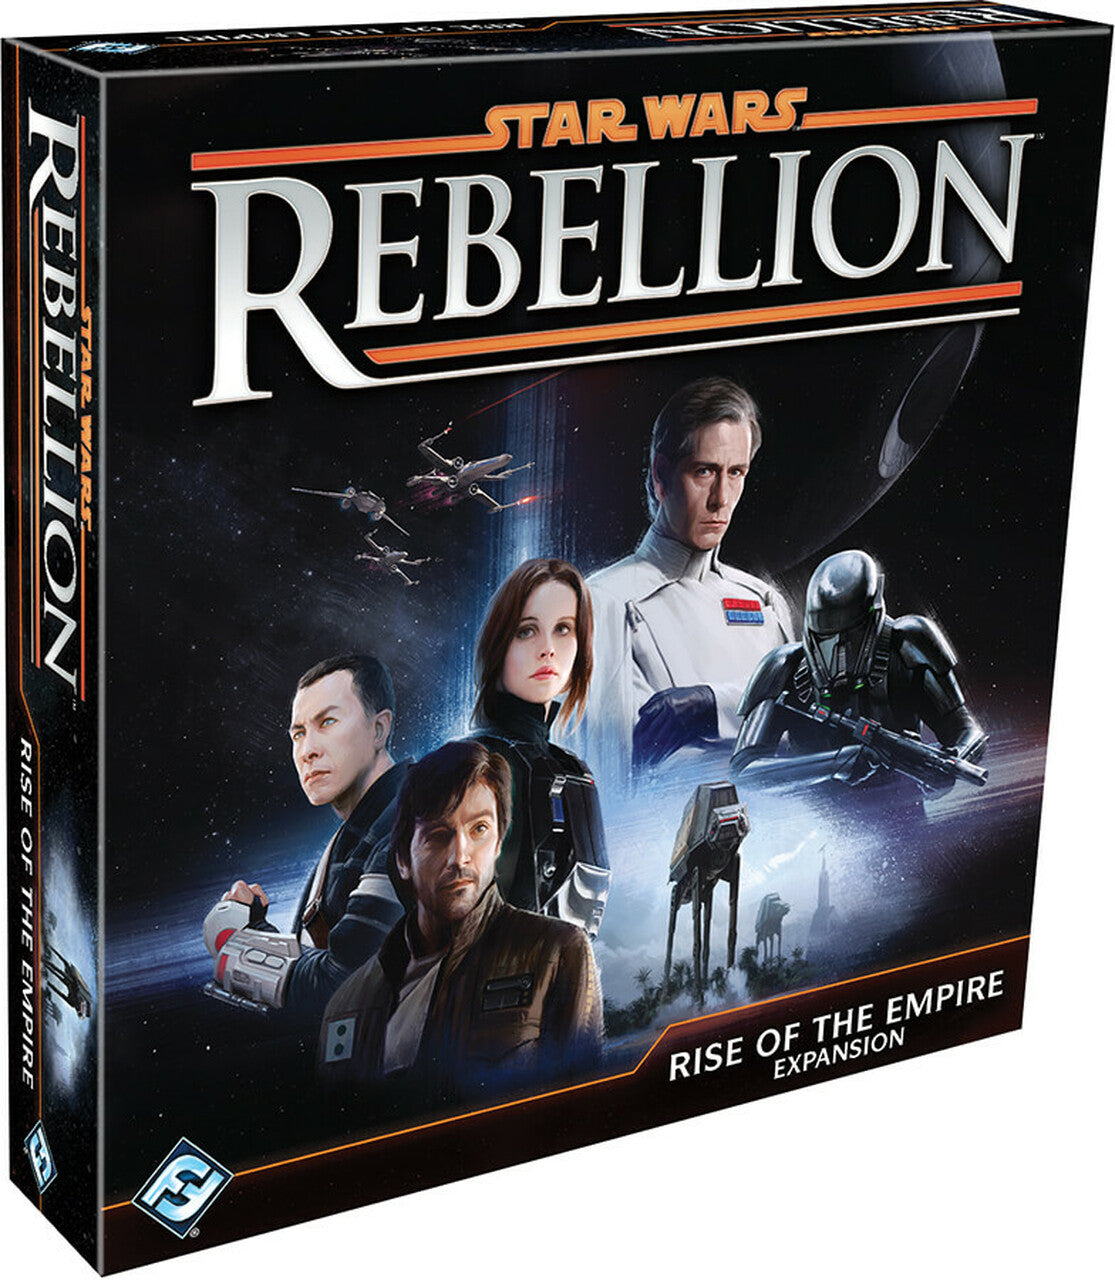 Star Wars: Rebellion: Rise of the Empire